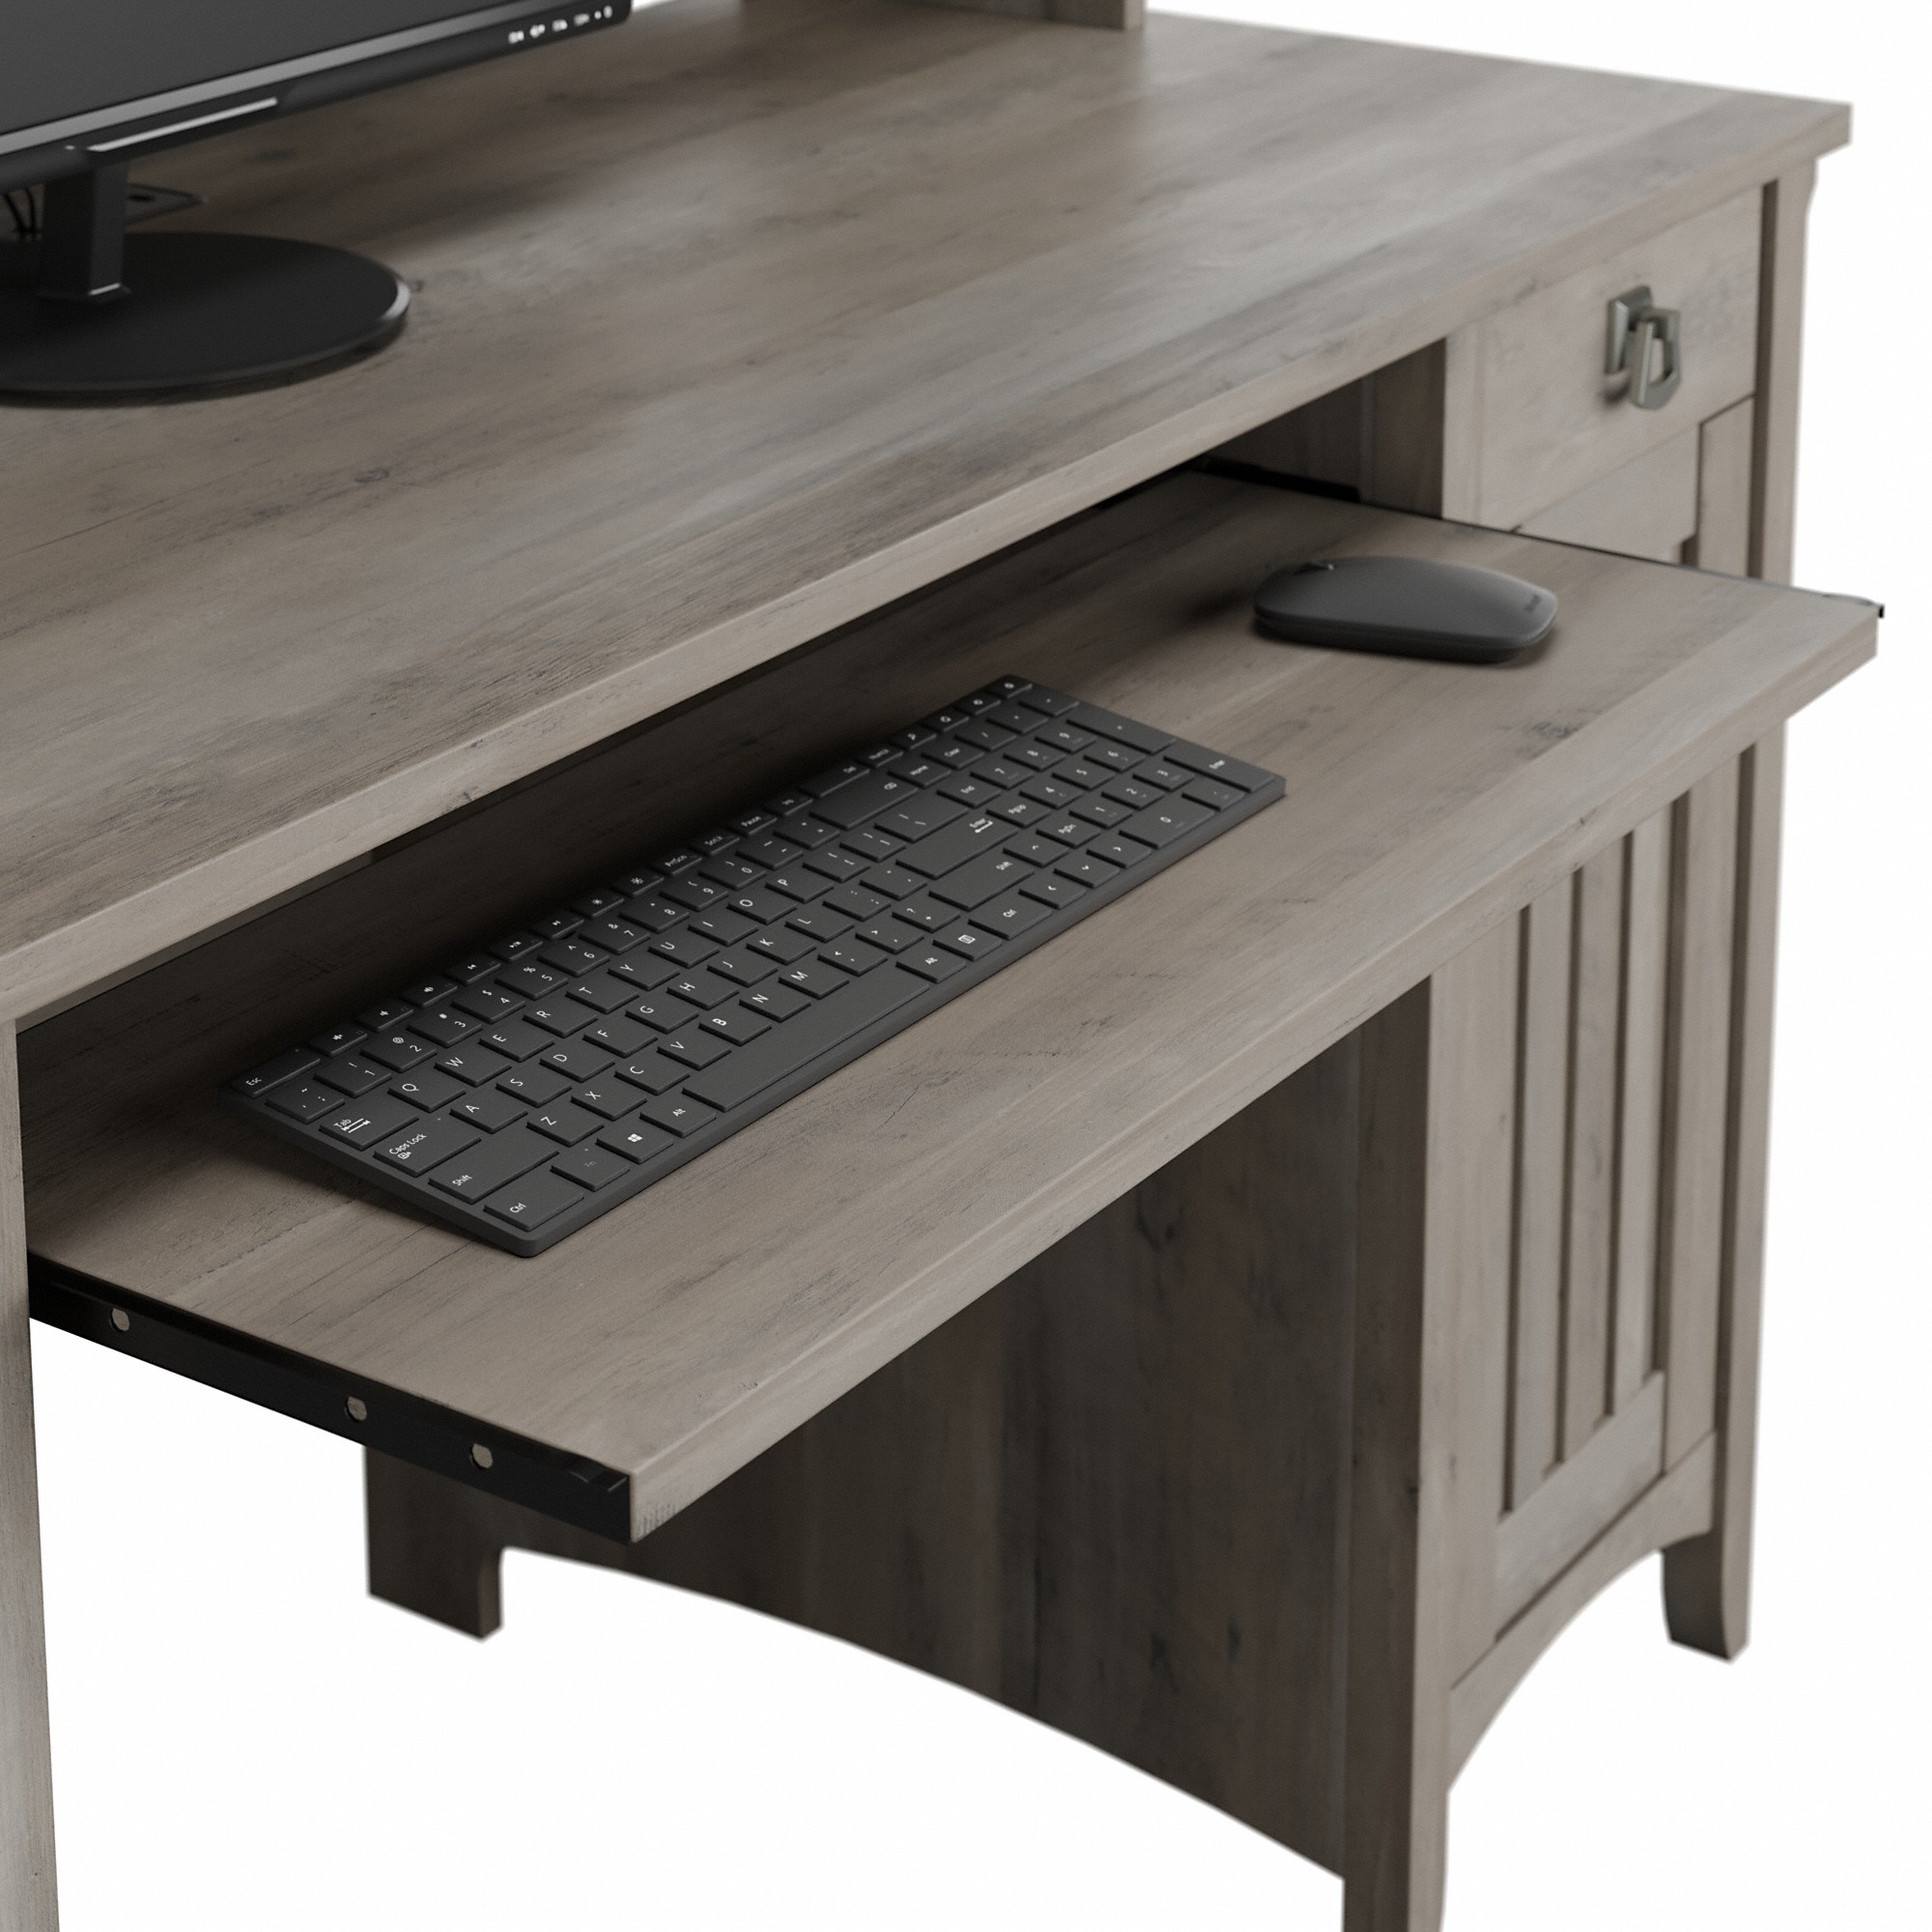 Bush Furniture Salinas 60" L Desk and Hutch with Storage, Driftwood Gray - image 5 of 8